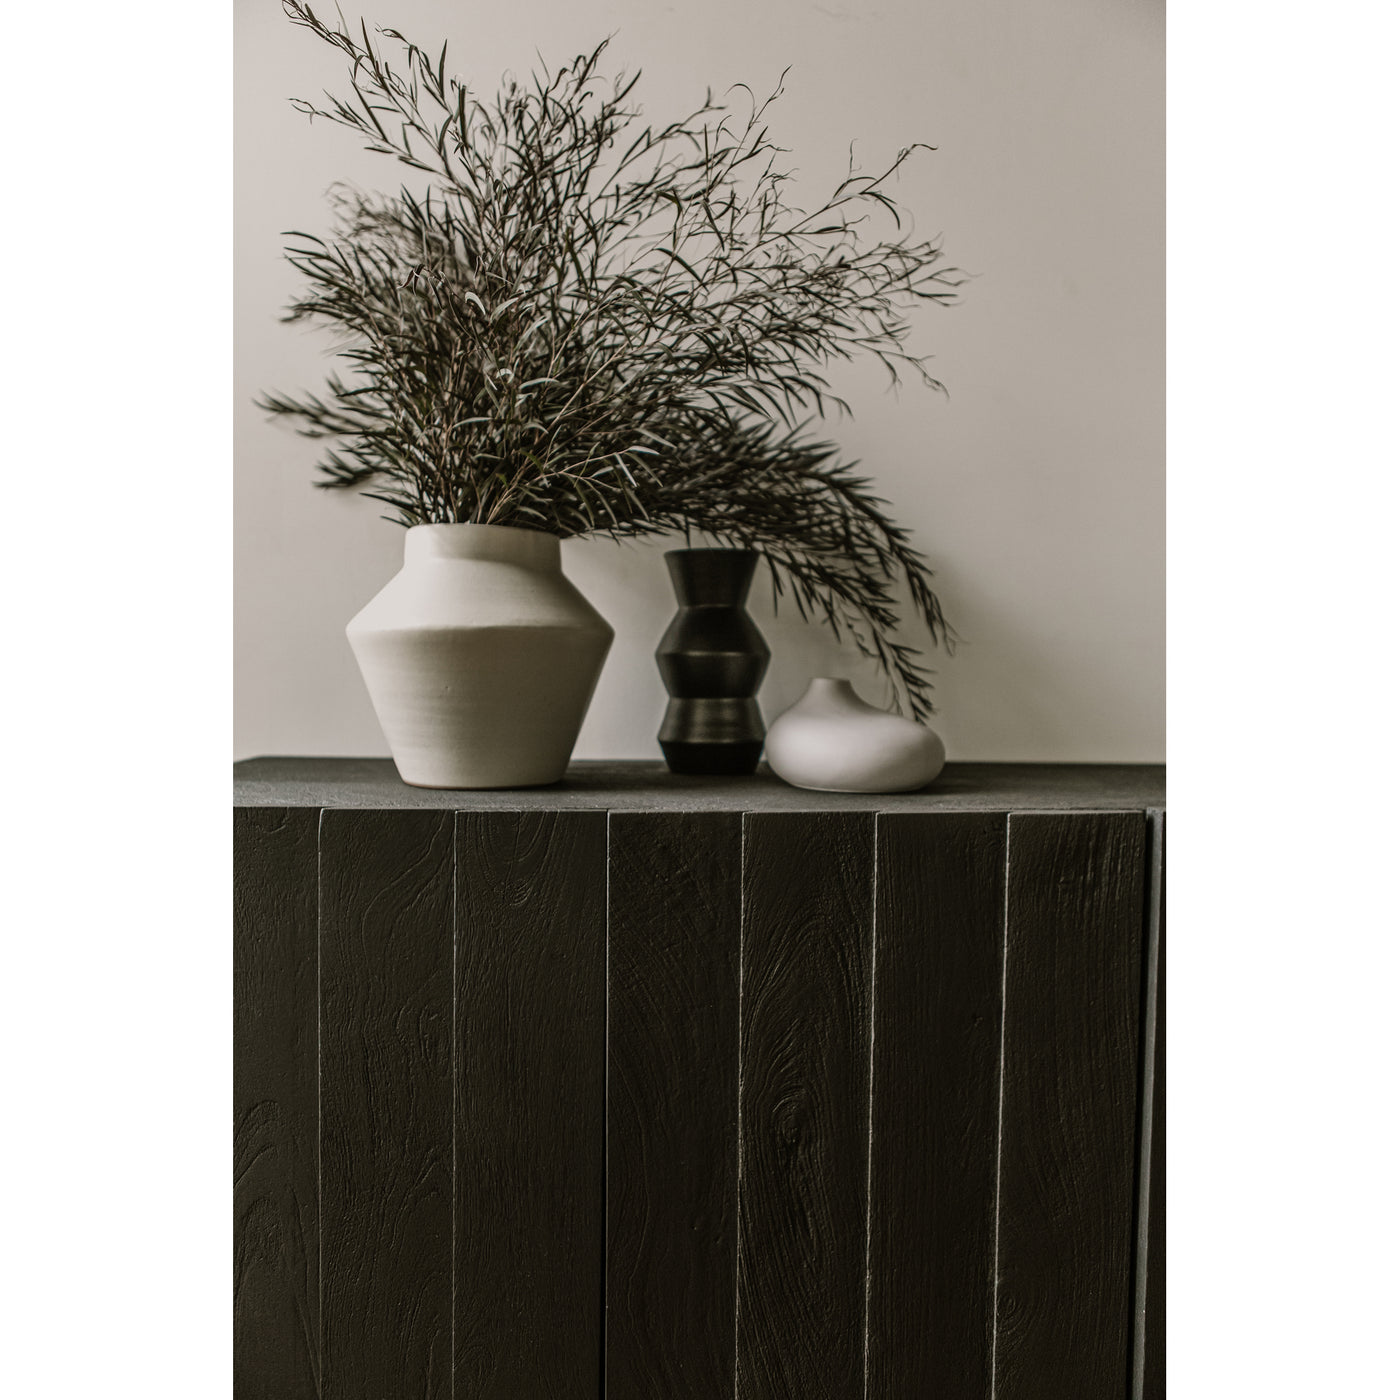 Invite darker hues and decorative introspection into your space with the Brolio collection. Solid, dark-hued mango wood cu...